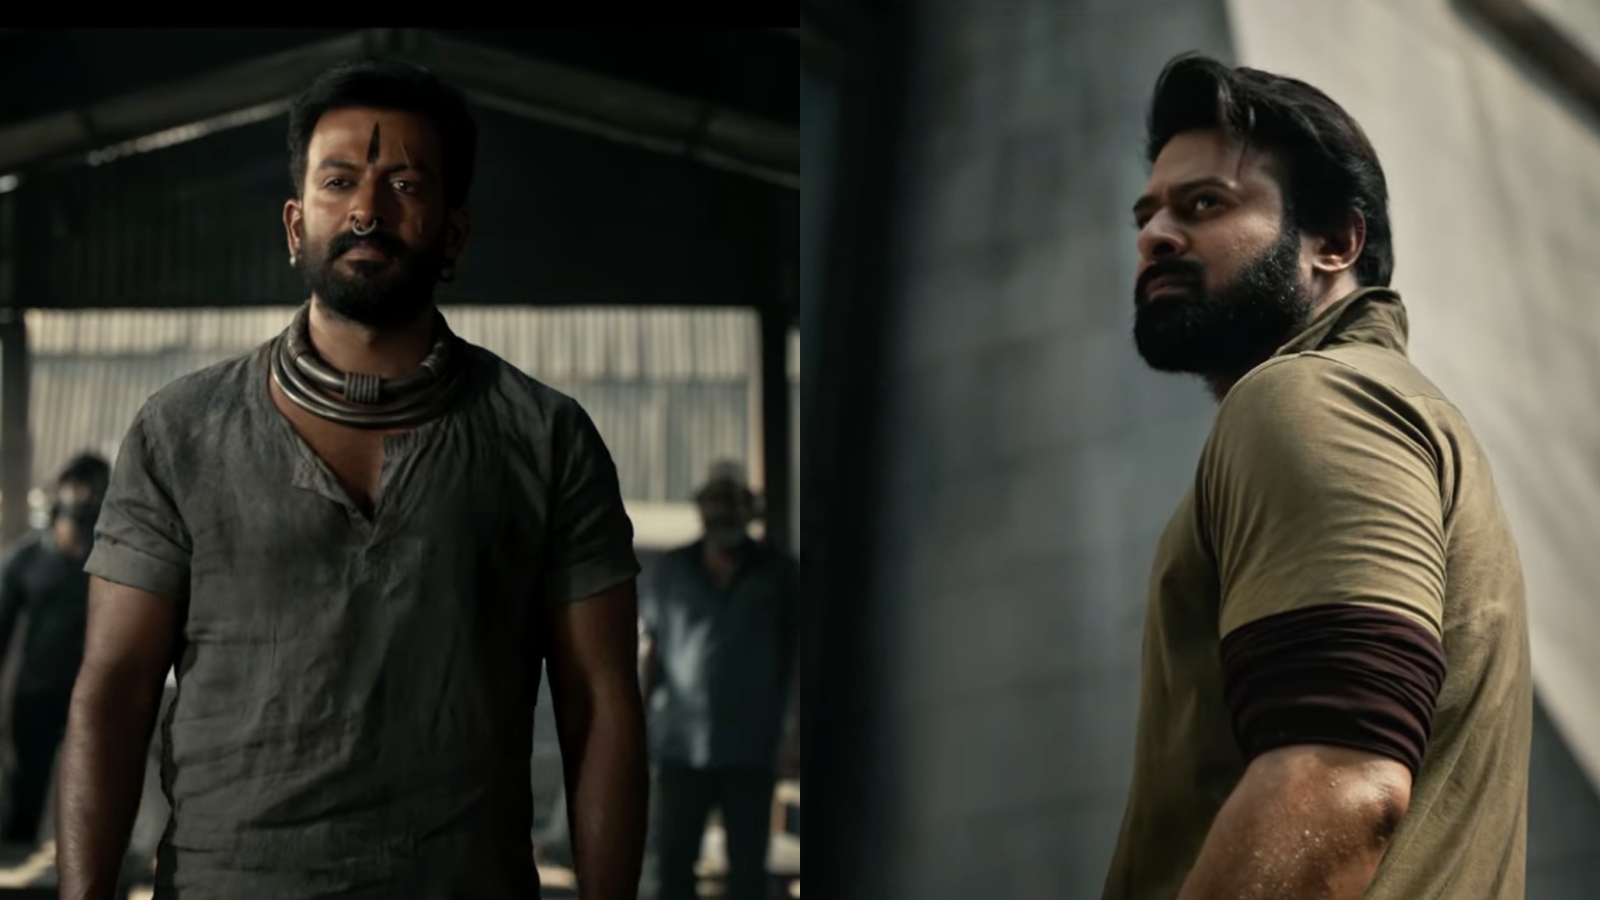 ‘The Scale of SALAAR Can Make KGF Look Small’: Prithiviraj On Comparisons Between KGF and Salaar